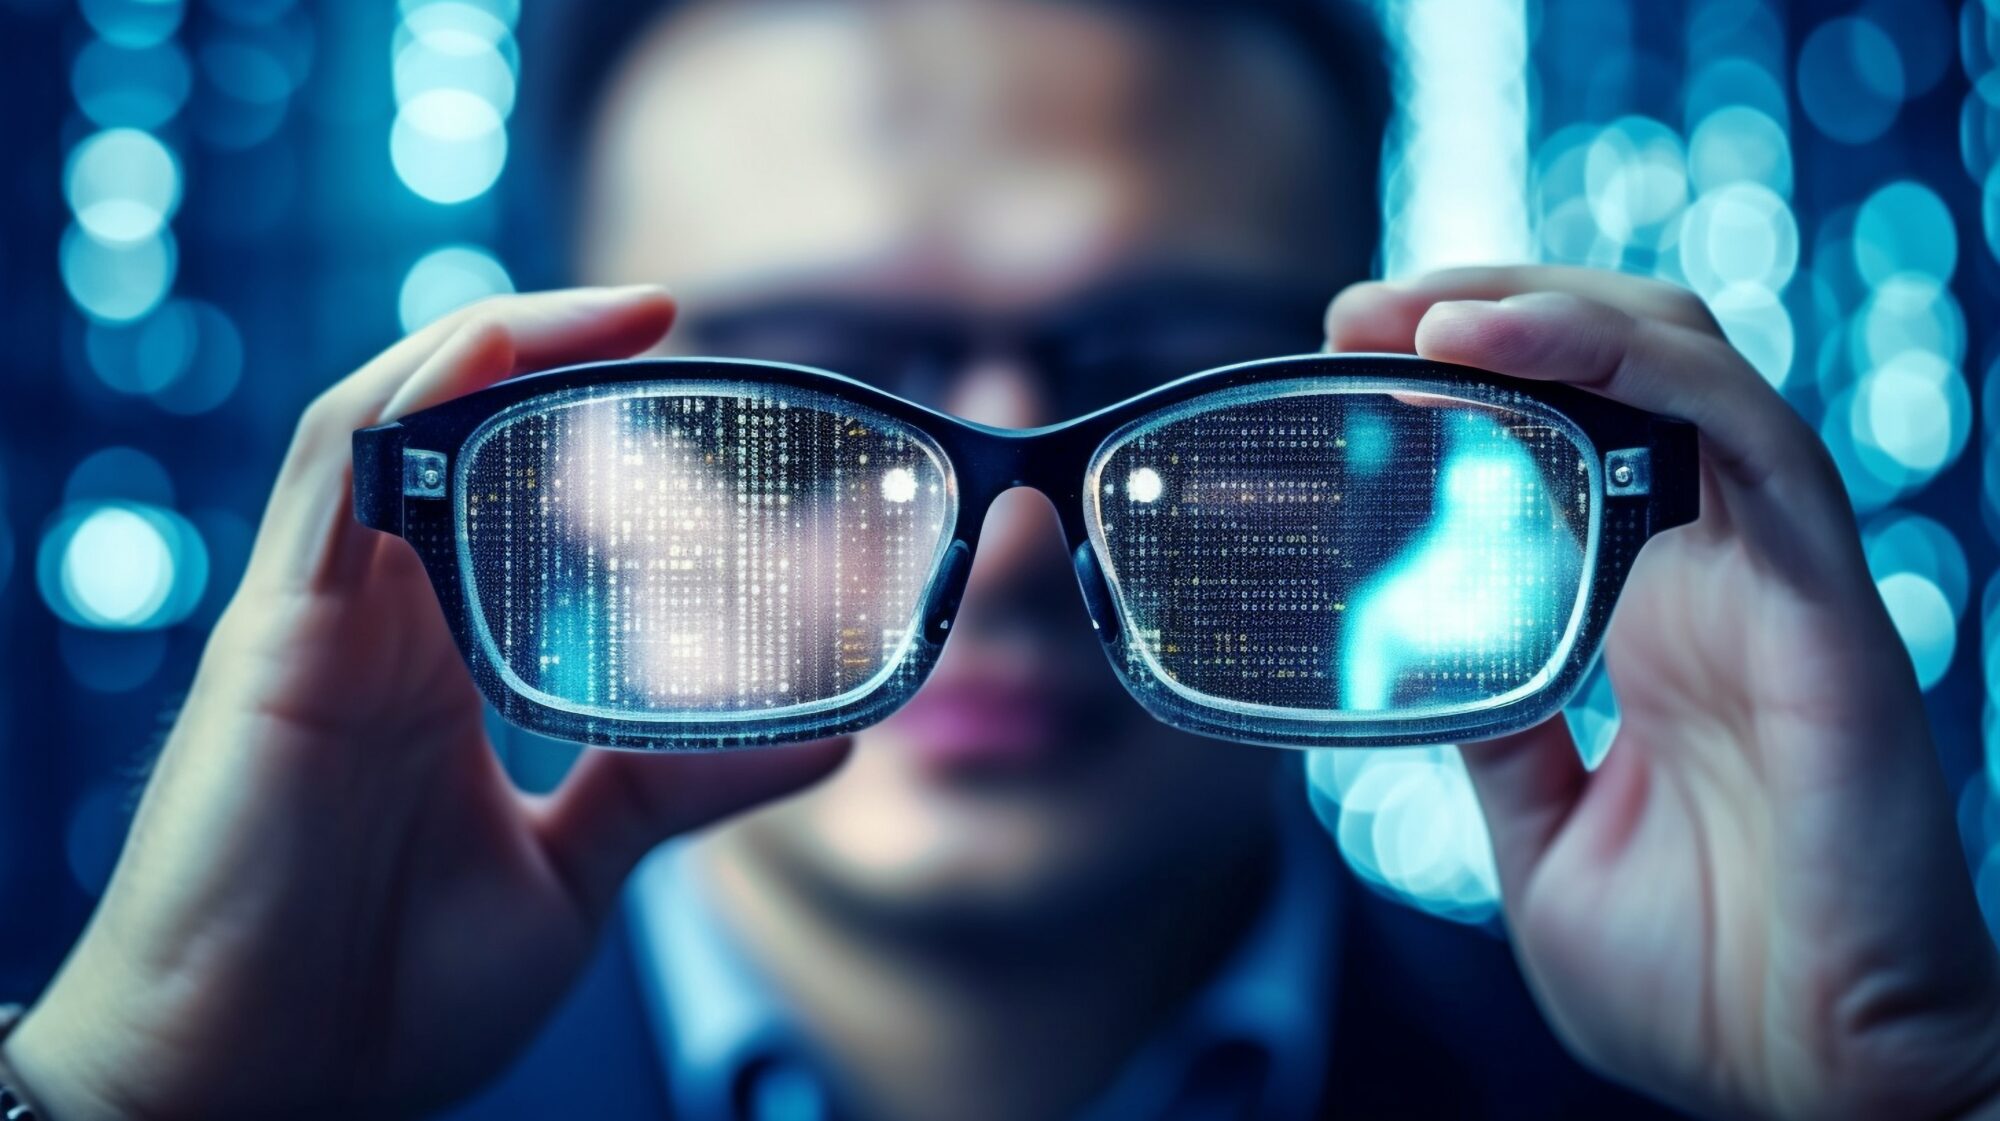 https://cms.nsflow.com/wp-content/uploads/2023/06/man-wearing-hightech-smart-glasses-searches-block-chain-icon-distributed-computing-system-with-businessman-s-hand-grasping-icon-using-generative-ai-2000x1121.jpg